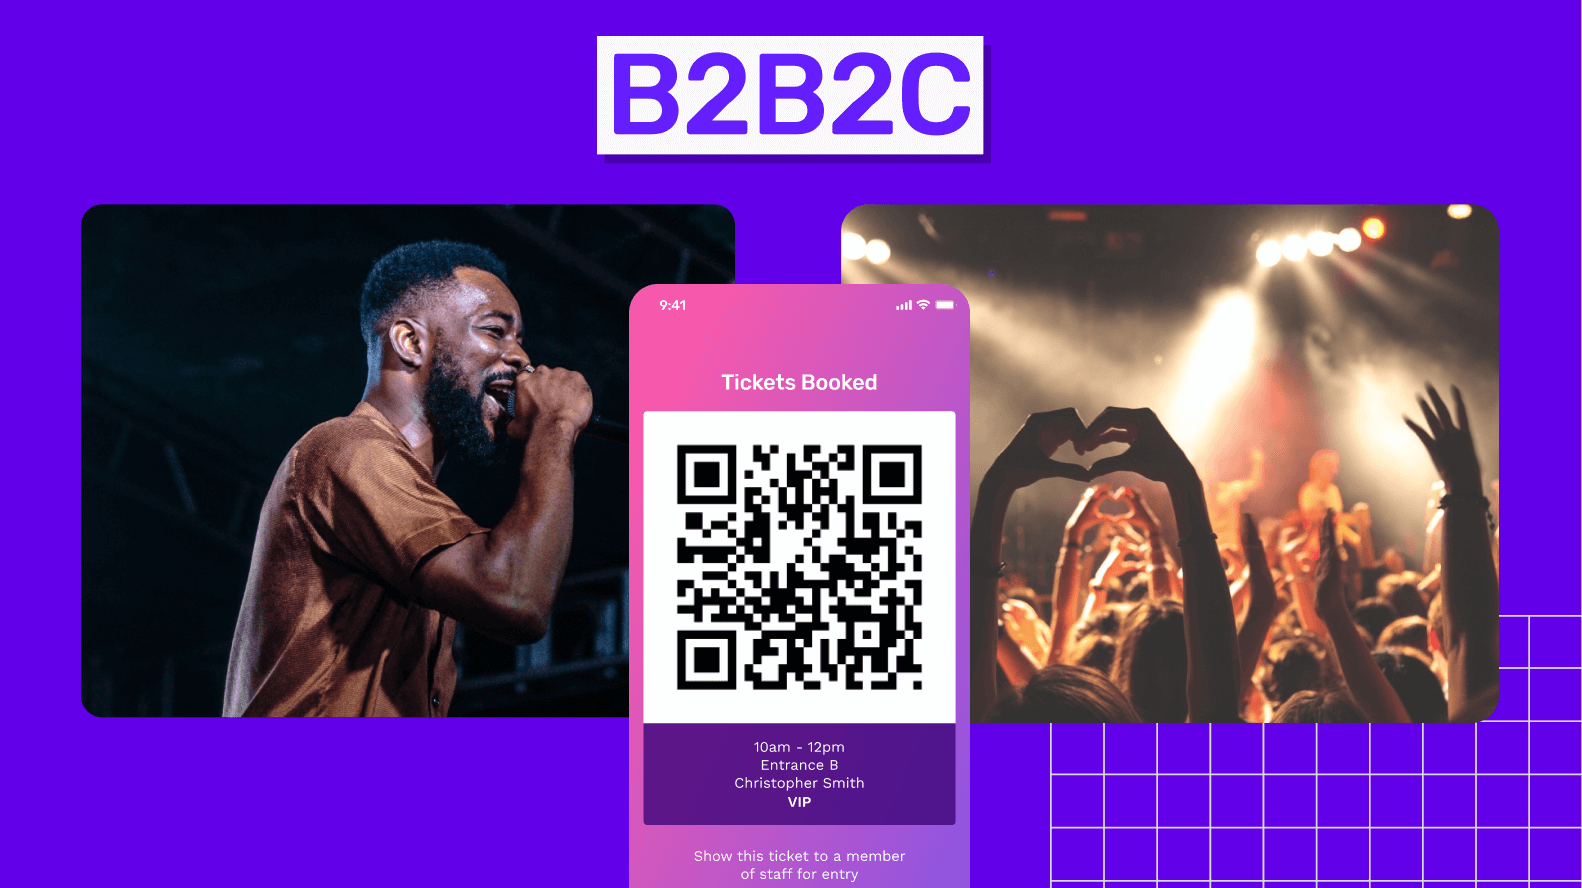 A concept of a B2B2C ecommerce business model depicting a music artist performing in a concert where another image depicts the audience cheering the artist